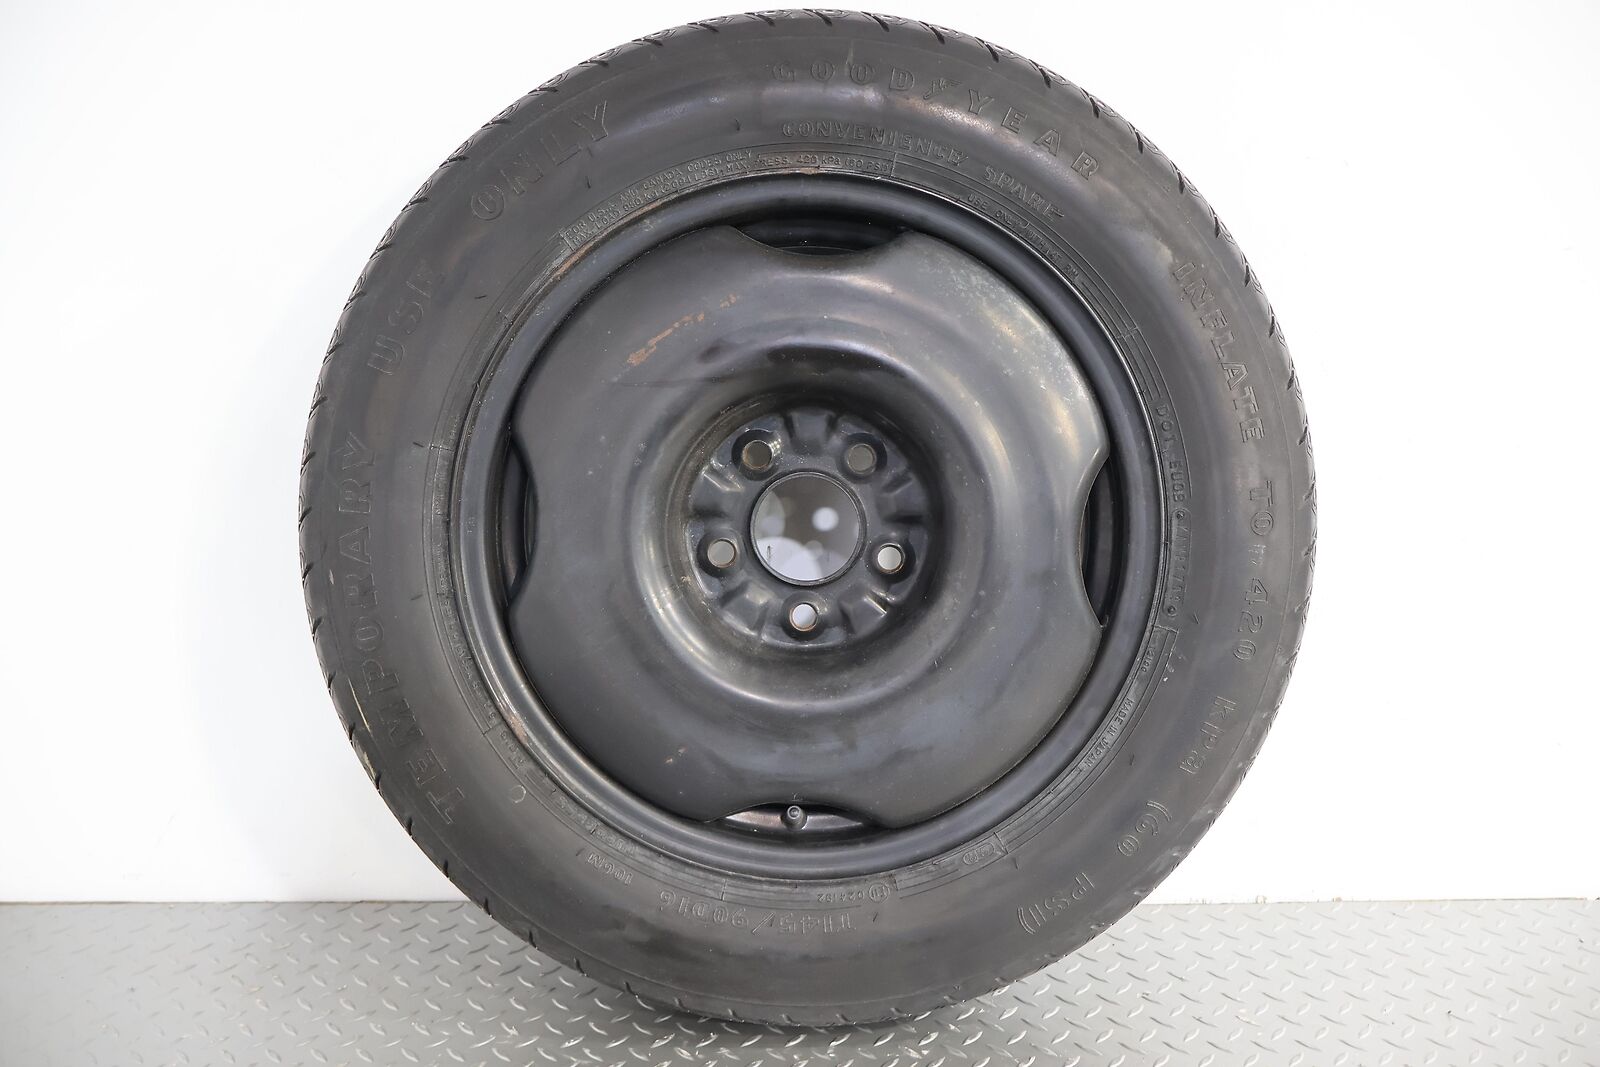 91-99 Mitsubishi 3000GT VR-4 OEM Compact Spare Tire 16x4 (Worn Tire)